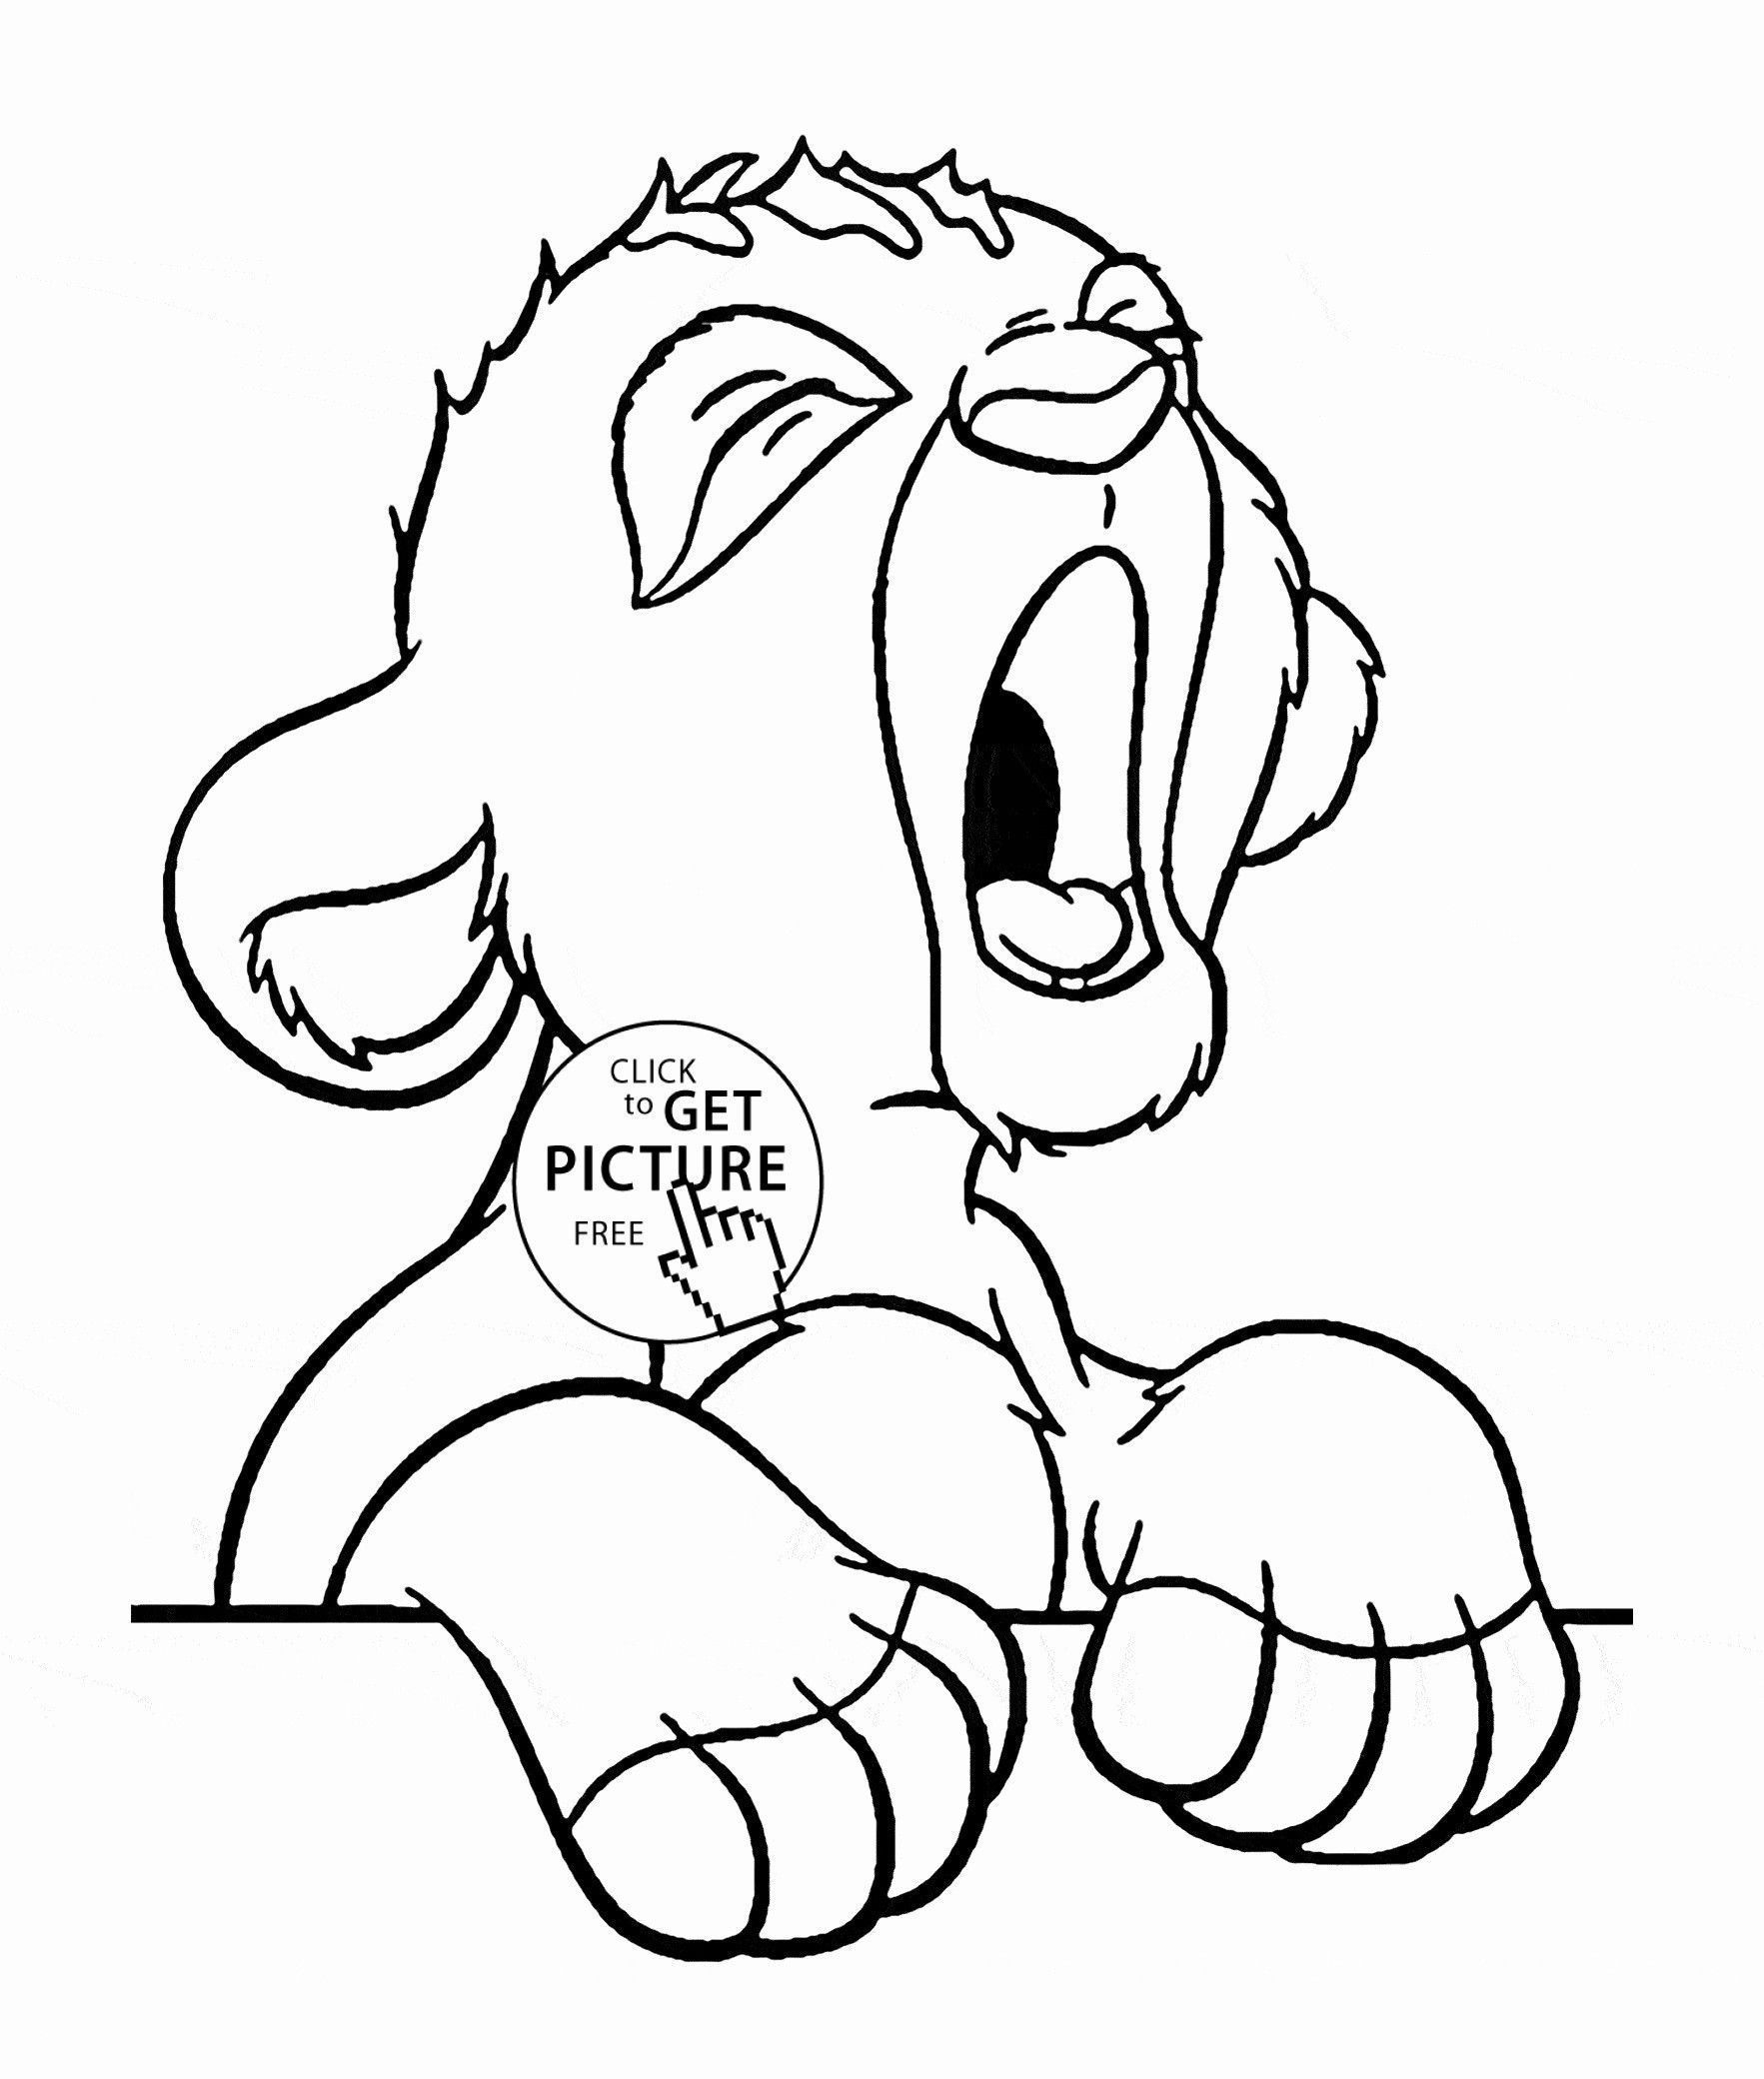 Jungle Coloring Pages Elegant Free Coloring Pages Jungle Animals Jvzooreview